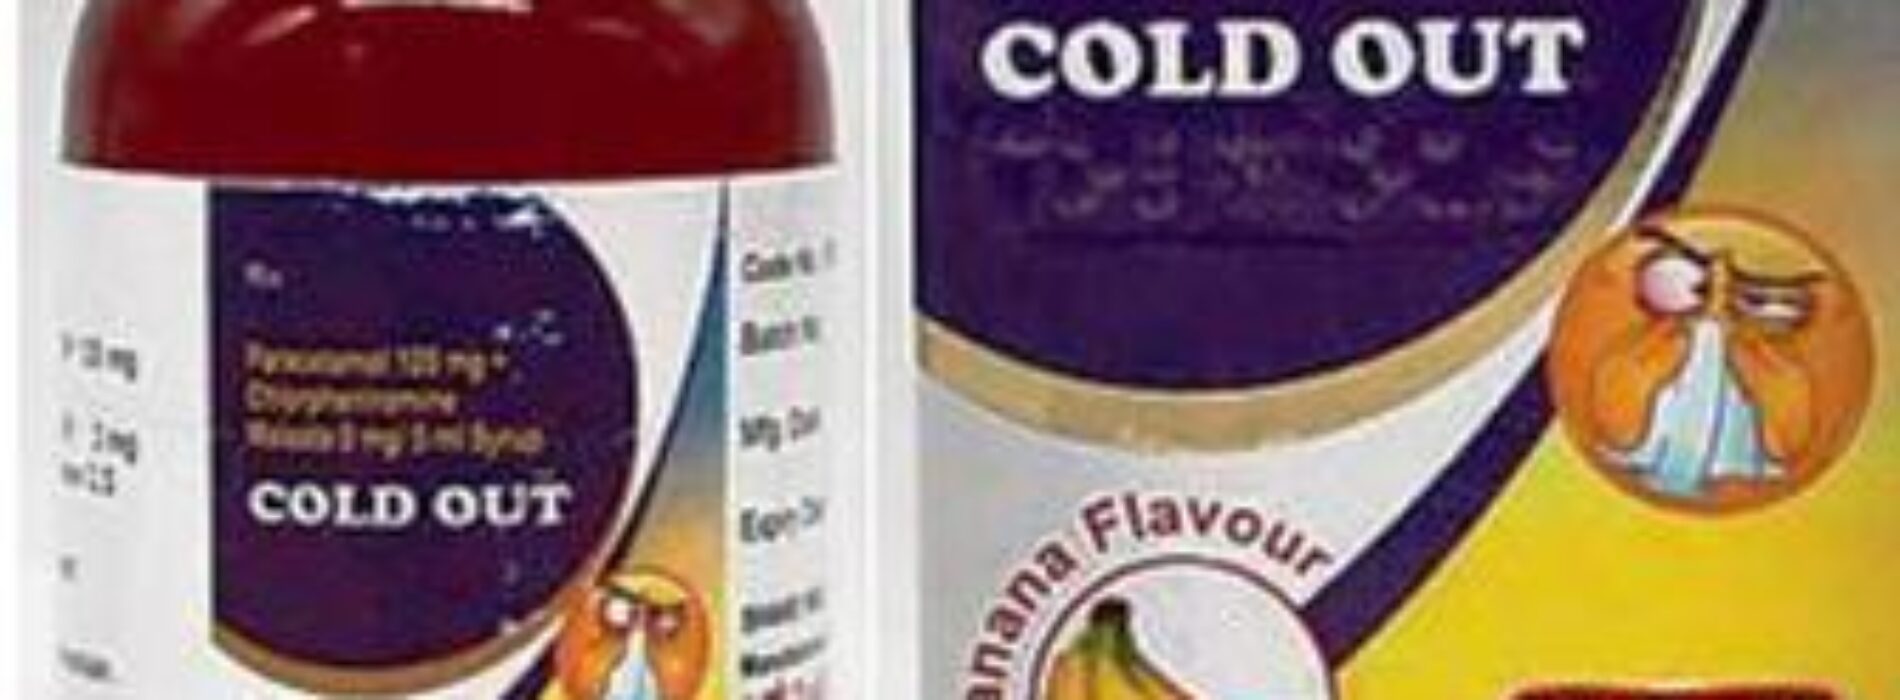 WHO issues alert on another contaminated Indian-made cough syrup